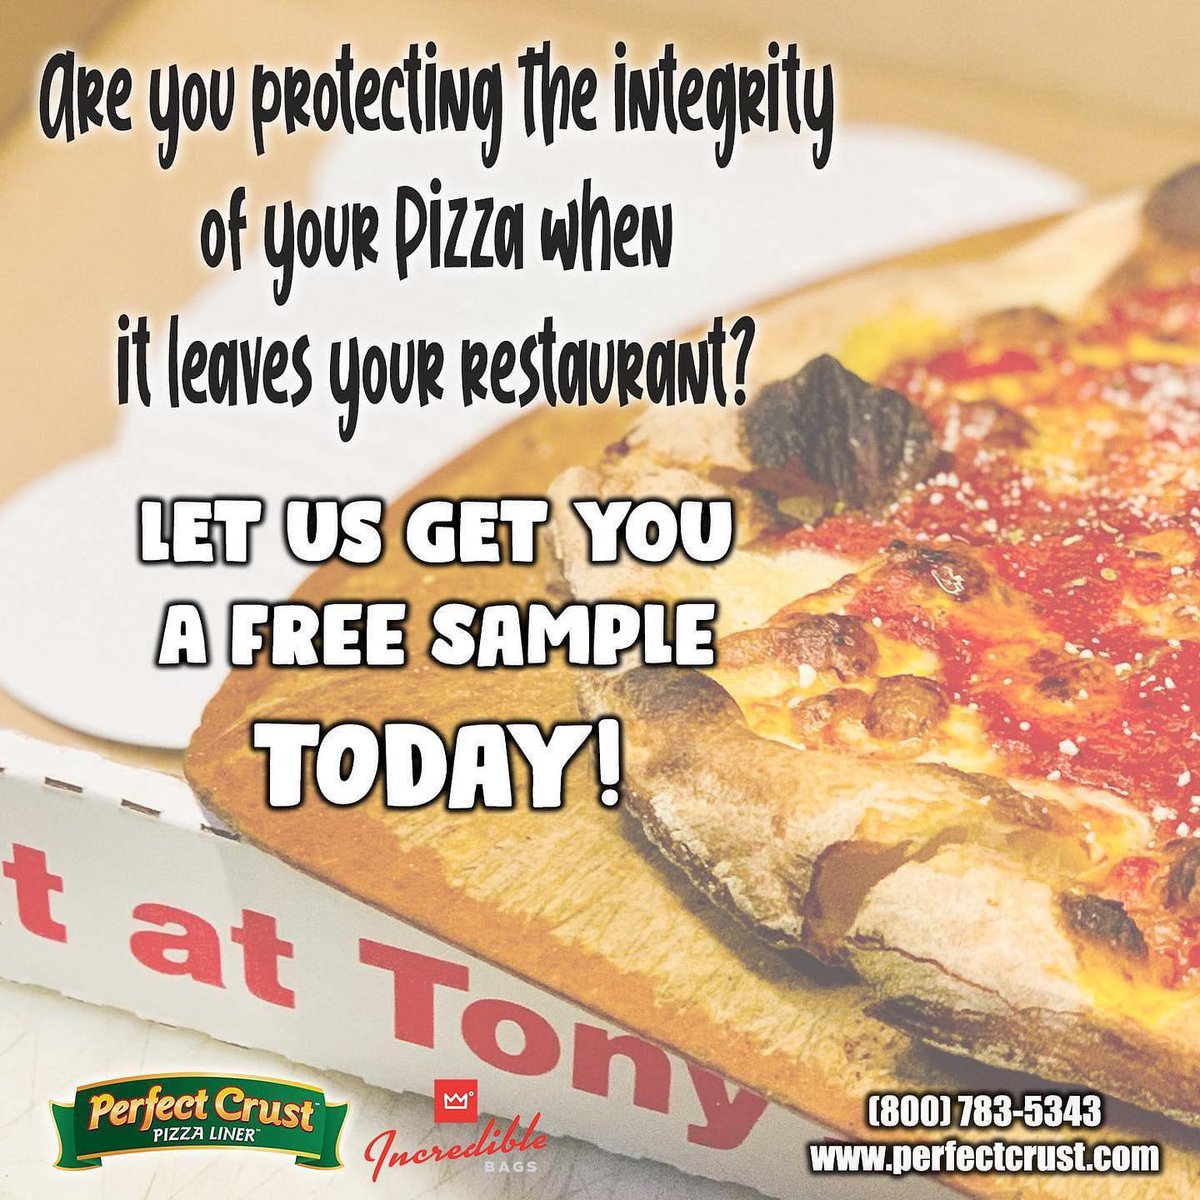 Can we get you a sample?
📷 (800) 783-5343
📷 perfectcrust.com/request-form
📷 message us!
#pizza #perfectcrust #freesample #samples #ecofriendly #worldpizzachampions #madeintheusa #beincredible